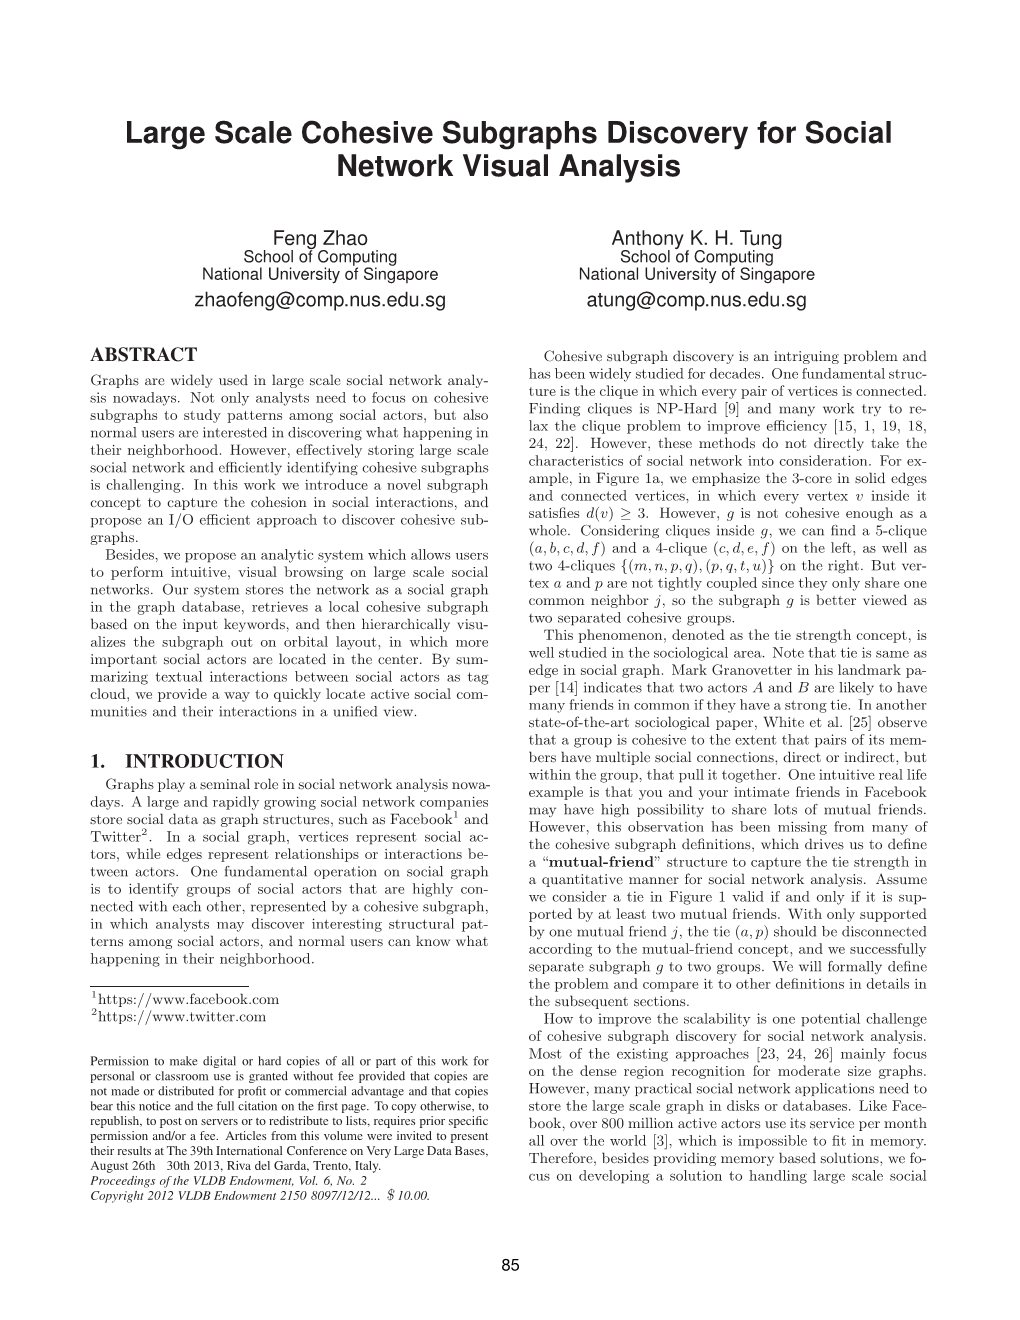 Large Scale Cohesive Subgraphs Discovery for Social Network Visual Analysis